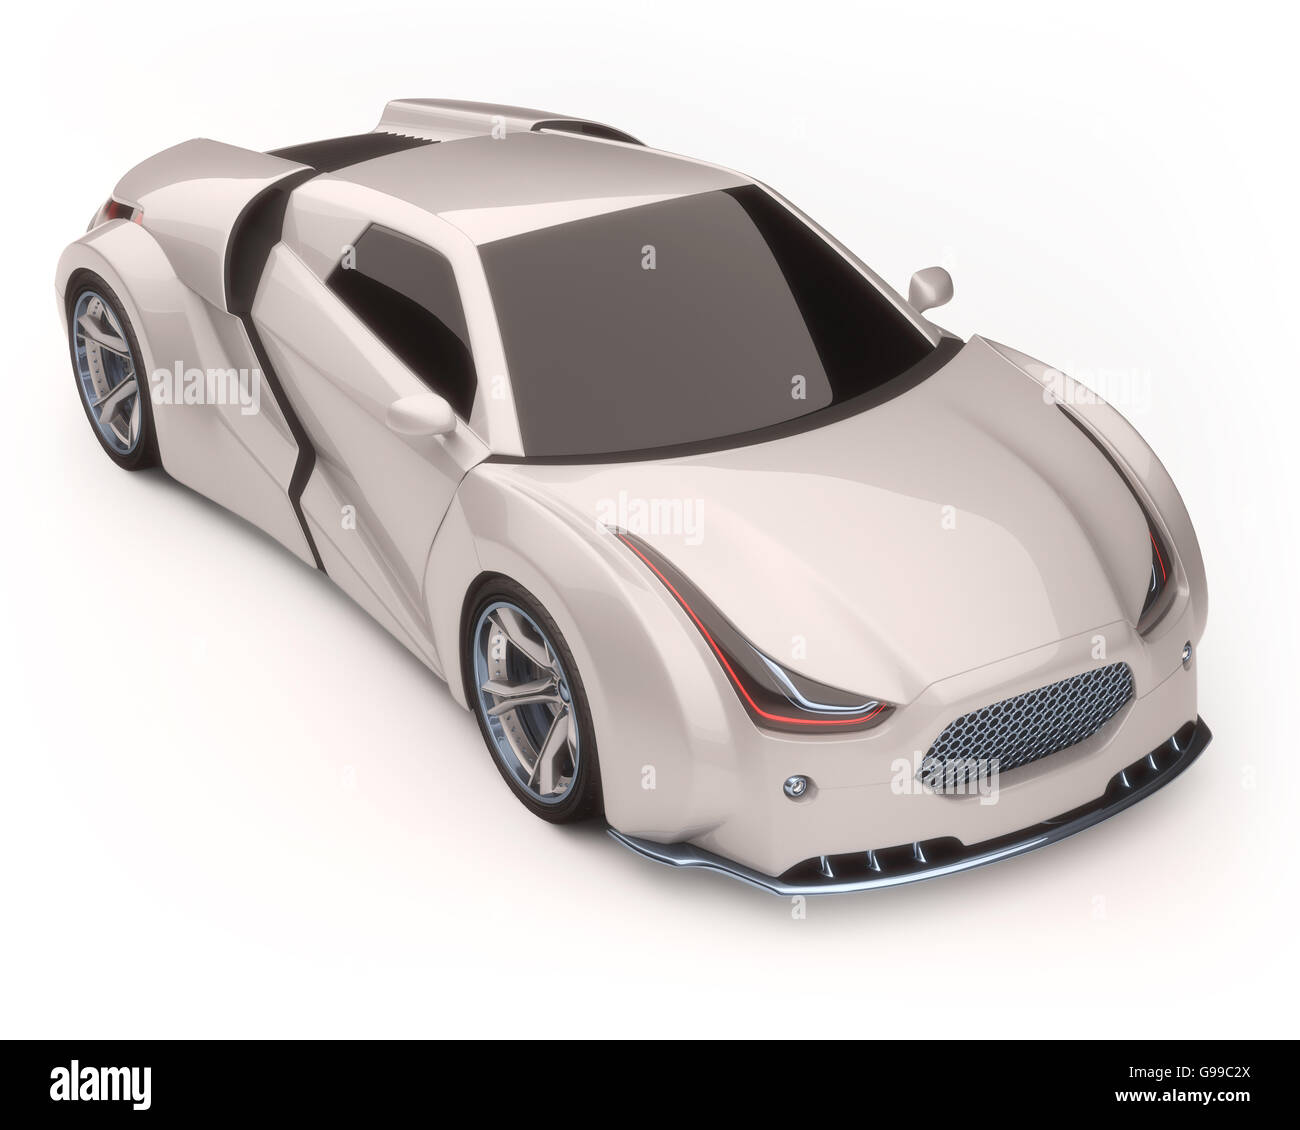 3d Illustration Concept Car Without Reference Based On Real Vehicles Clipping Path Included Stock Photo Alamy